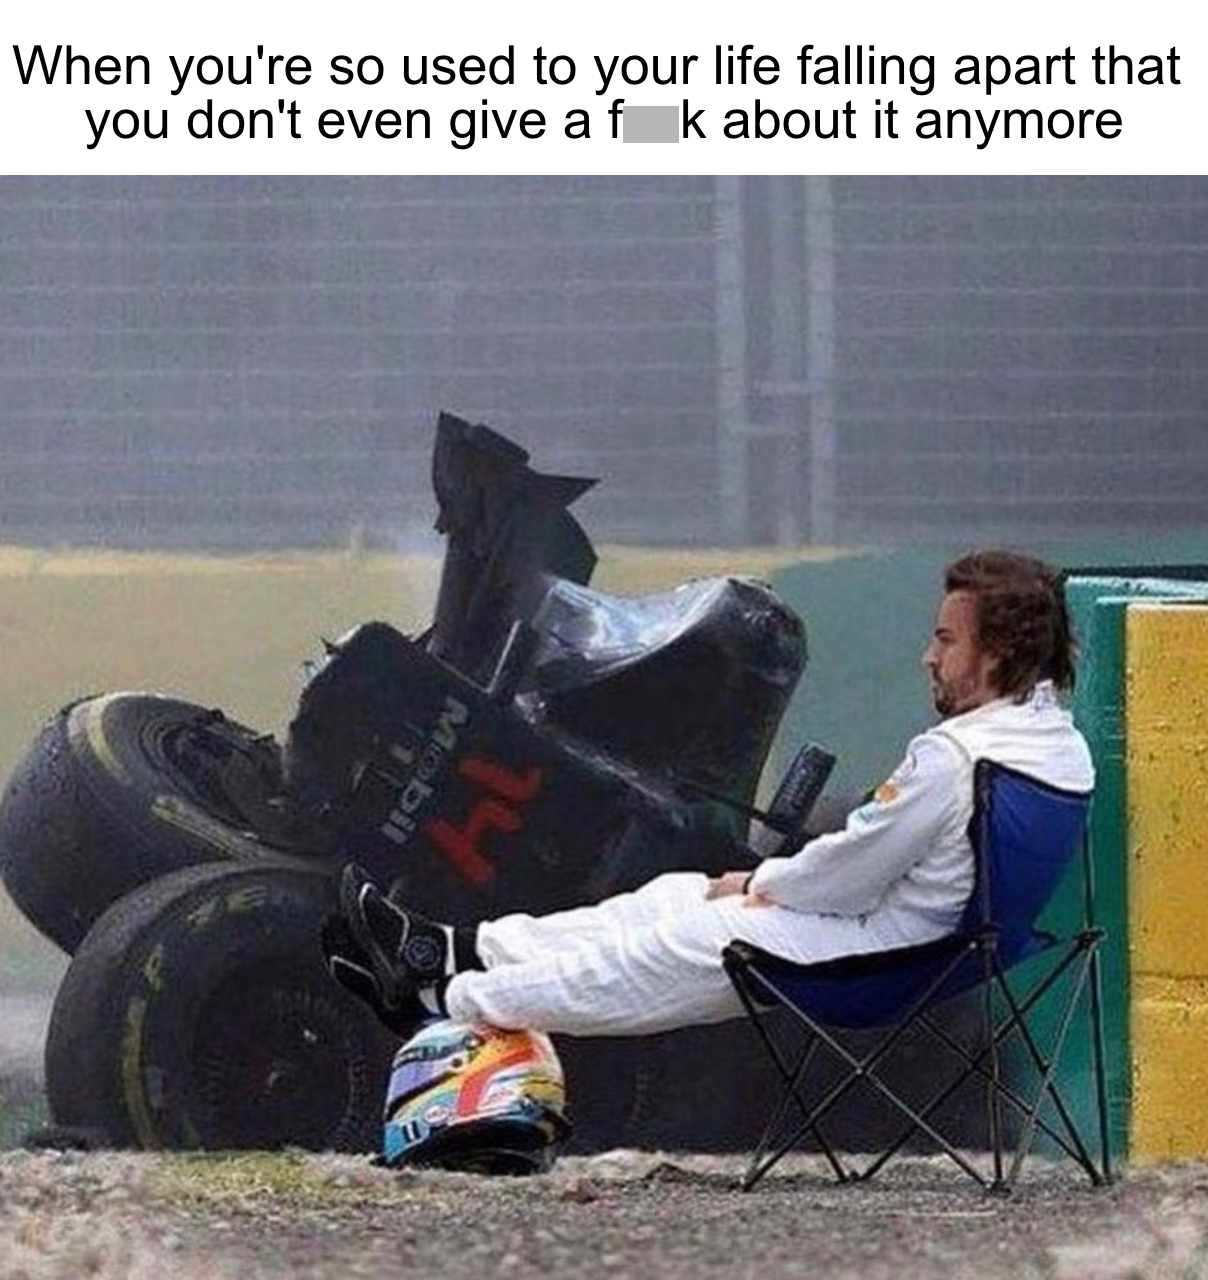 fresh memes - When you're so used to your life falling apart that you don't even give a f k about it anymore Mobil